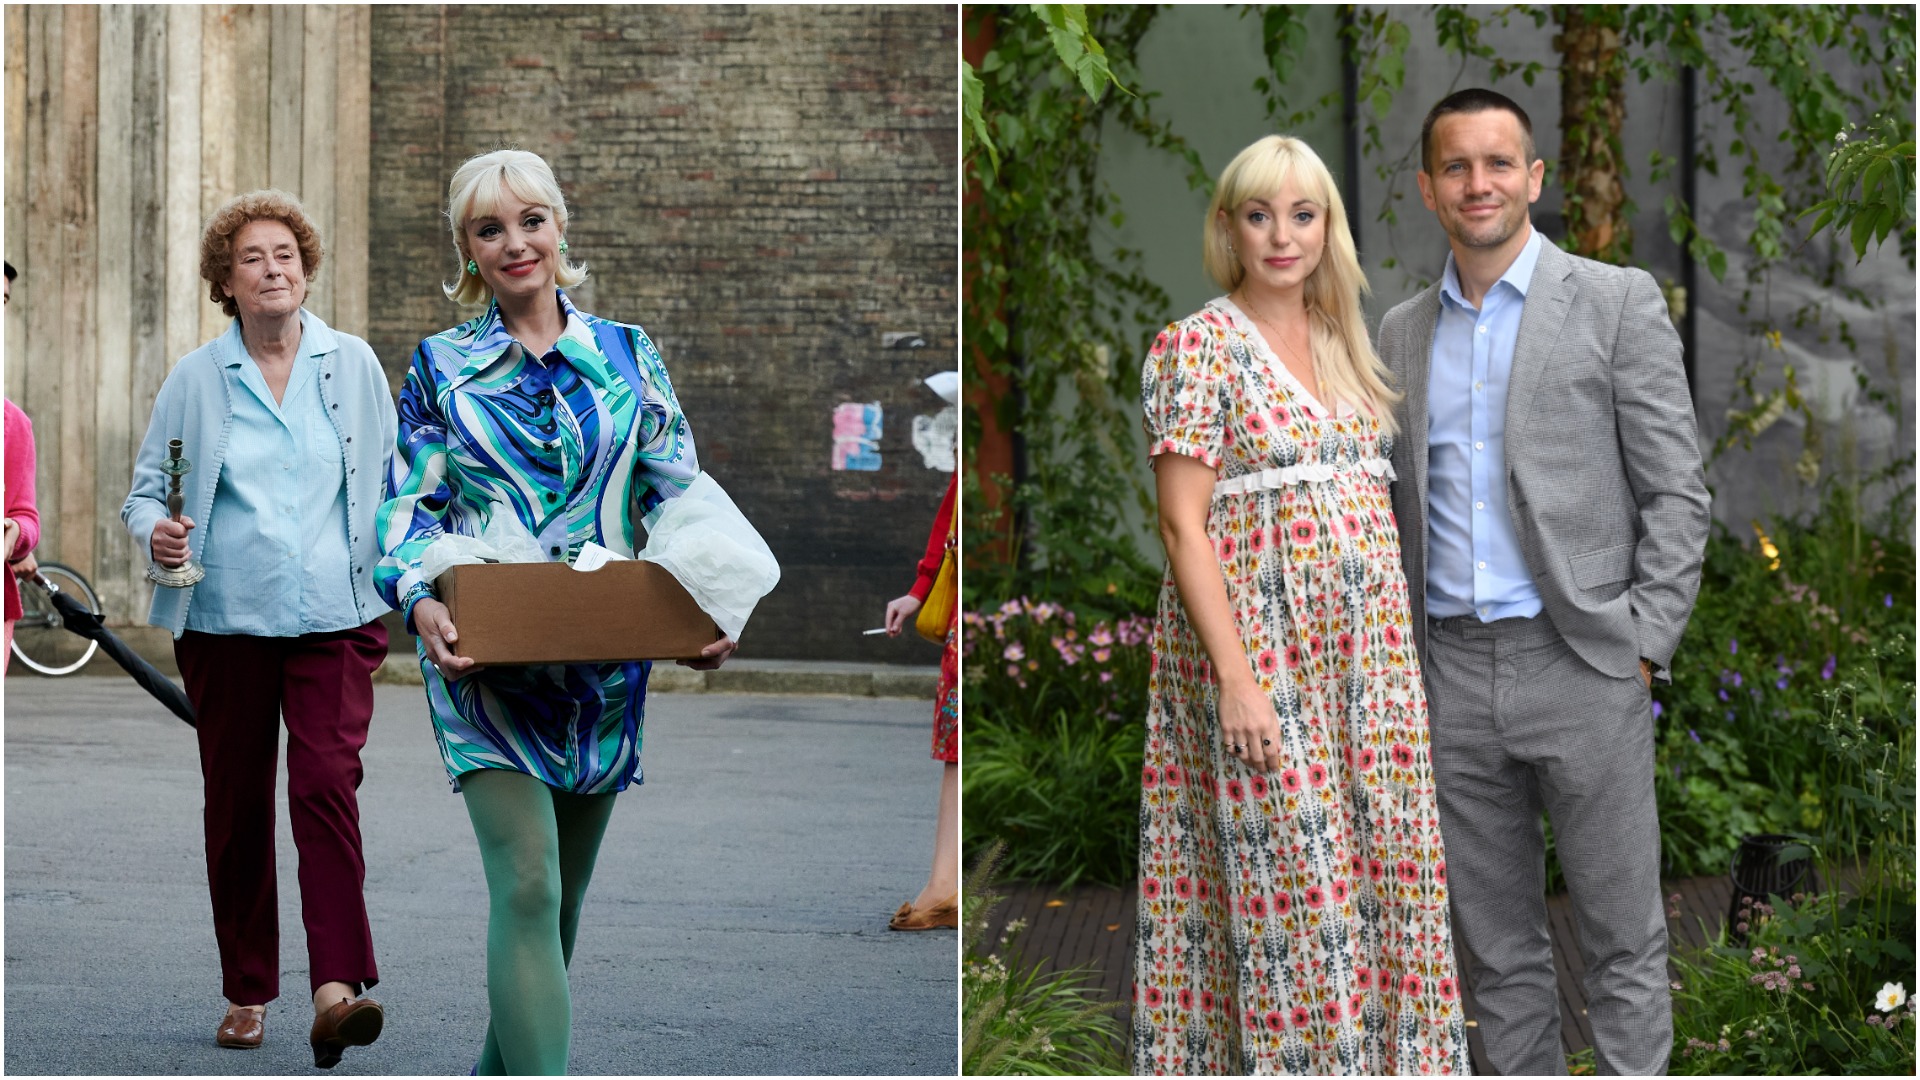 Call The Midwife Star Helen George Faced Criticism For Filming Season 4637